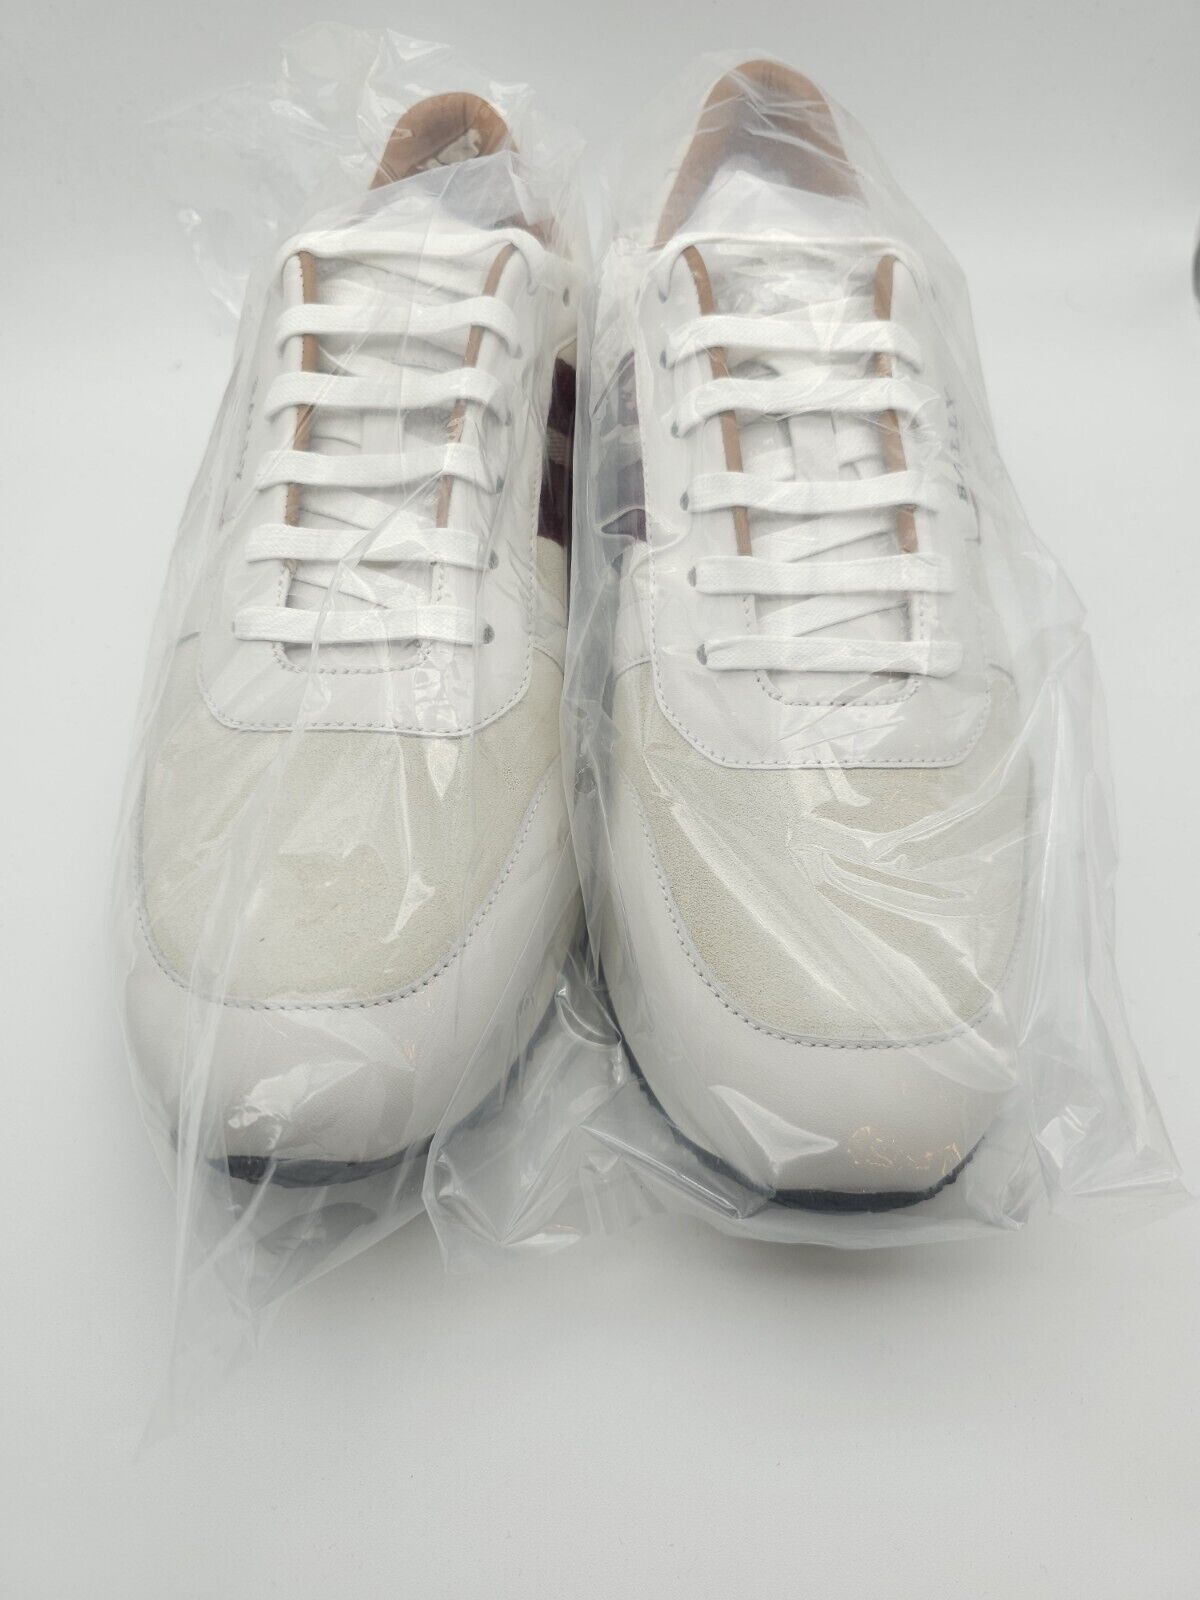 Bally Sprinter Calf Plain Leather Suede Sneaker Shoes White US 11 $650 GL023064